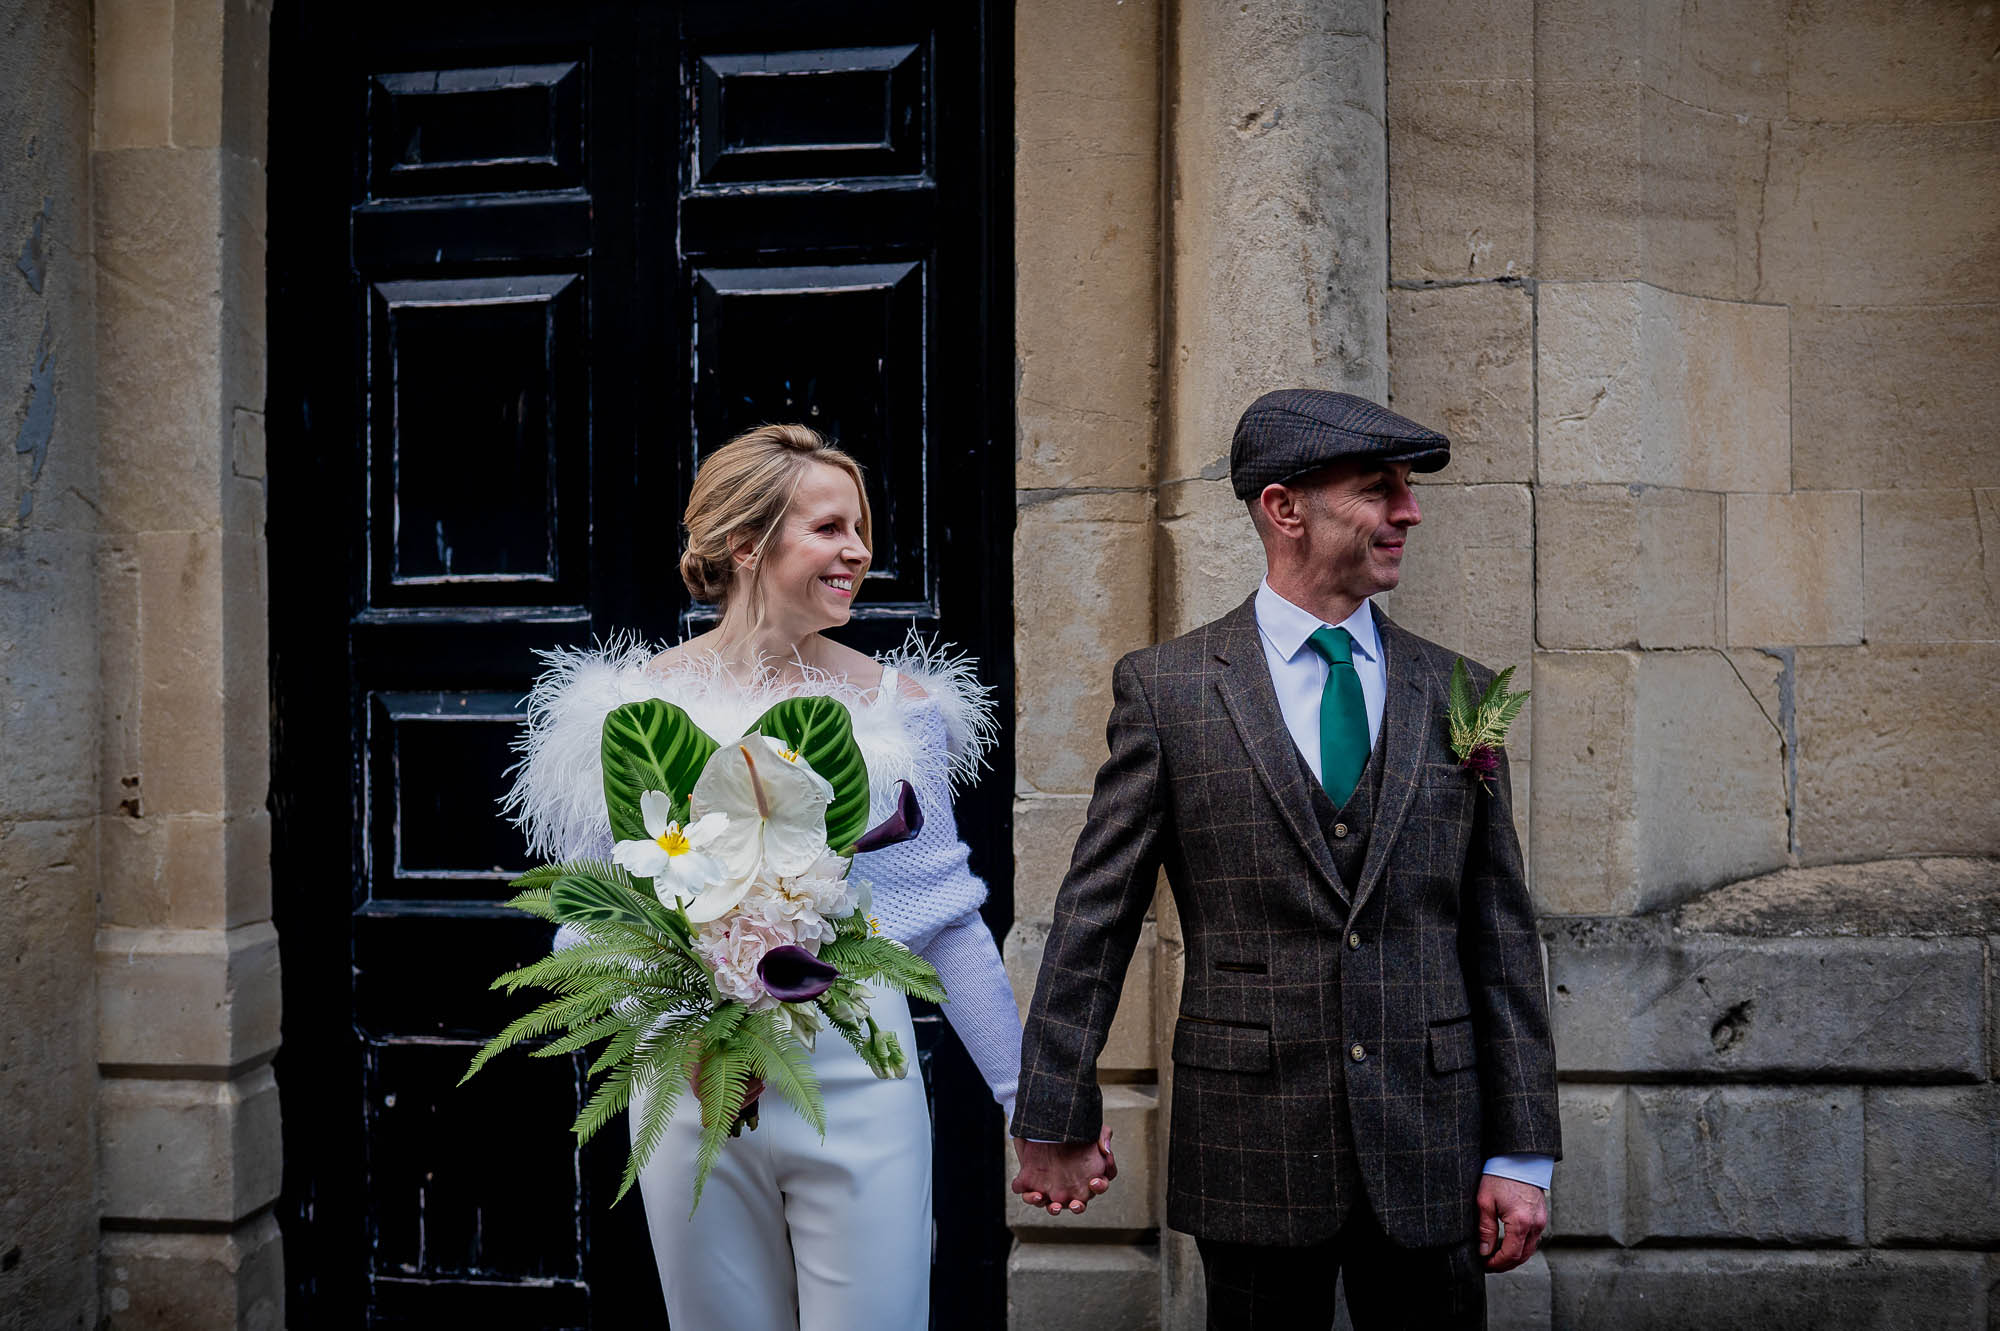 Sunrise wedding photography from the Roman baths in Bath, with Andy and Olivia captured by Damien Vickers Photography